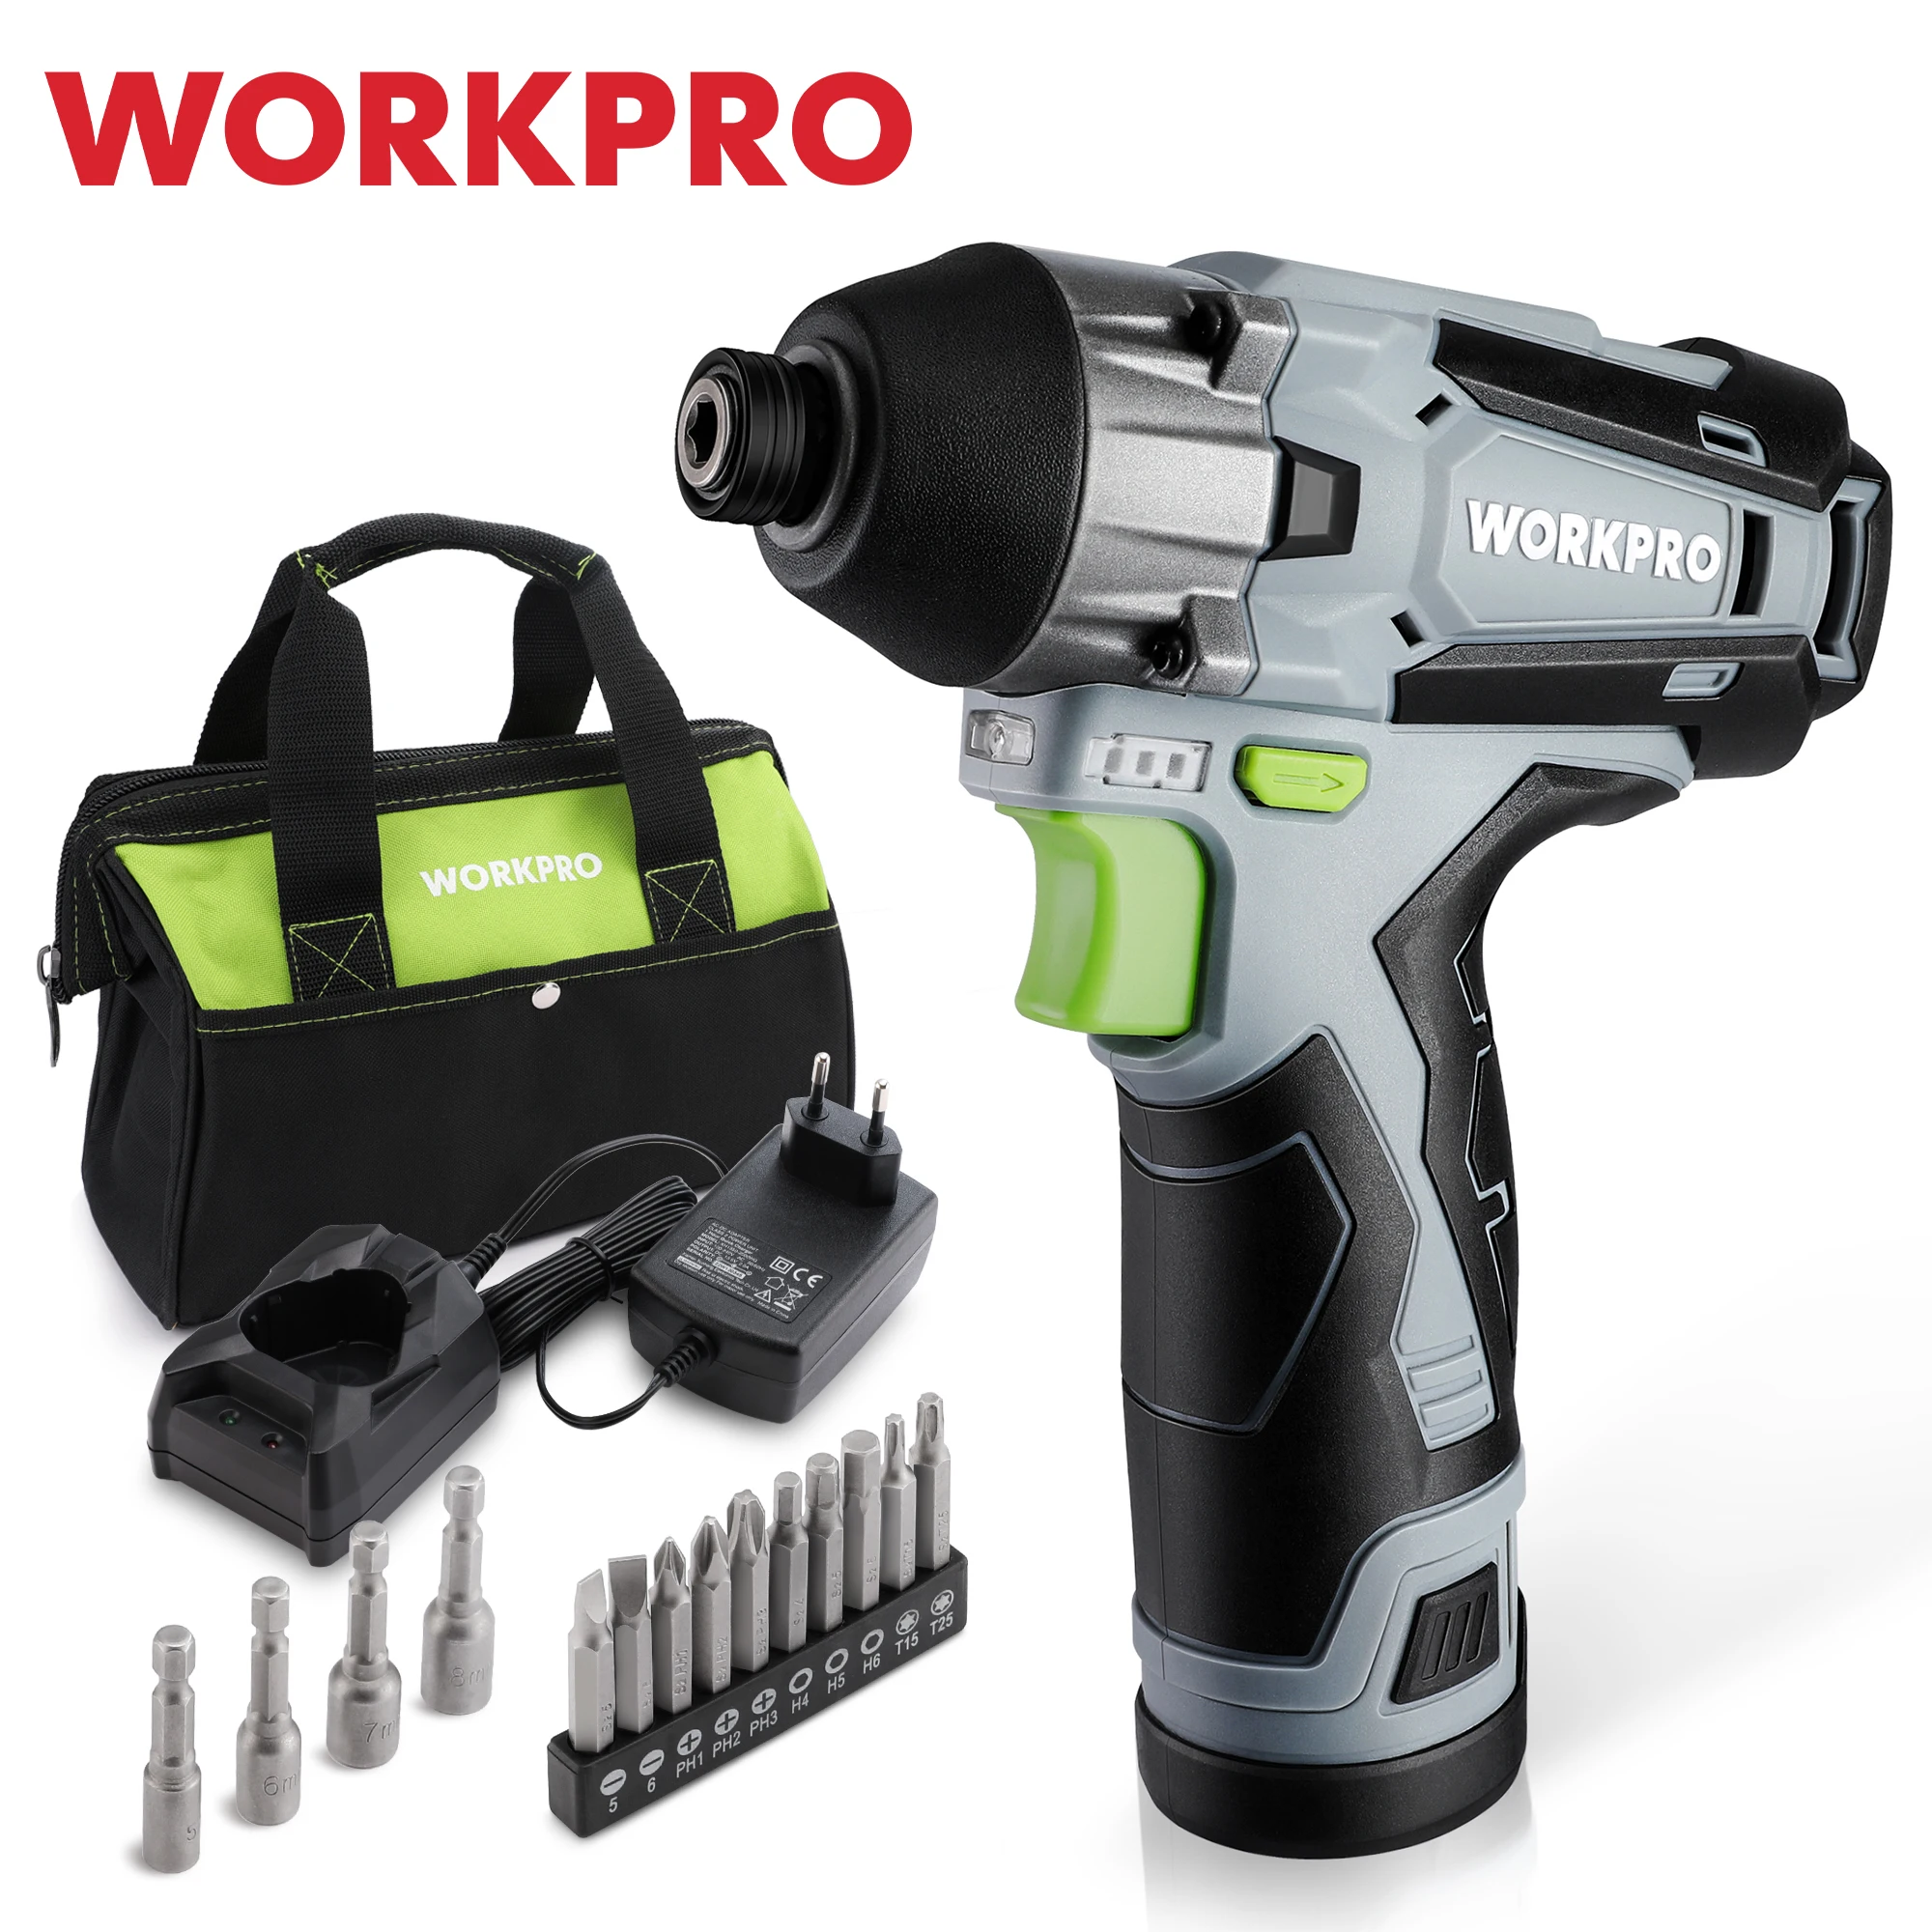 WORKPRO 12V Cordless Impact Driver Kit 1/4” Hex Electric Impact Drill/Driver Set 100NM Torque Electric Screwdriver fast charging valuemax 100n m electric drill screwdriver 1 4” hex cordless impact driver kit 12v lithium ion power tool fast charging